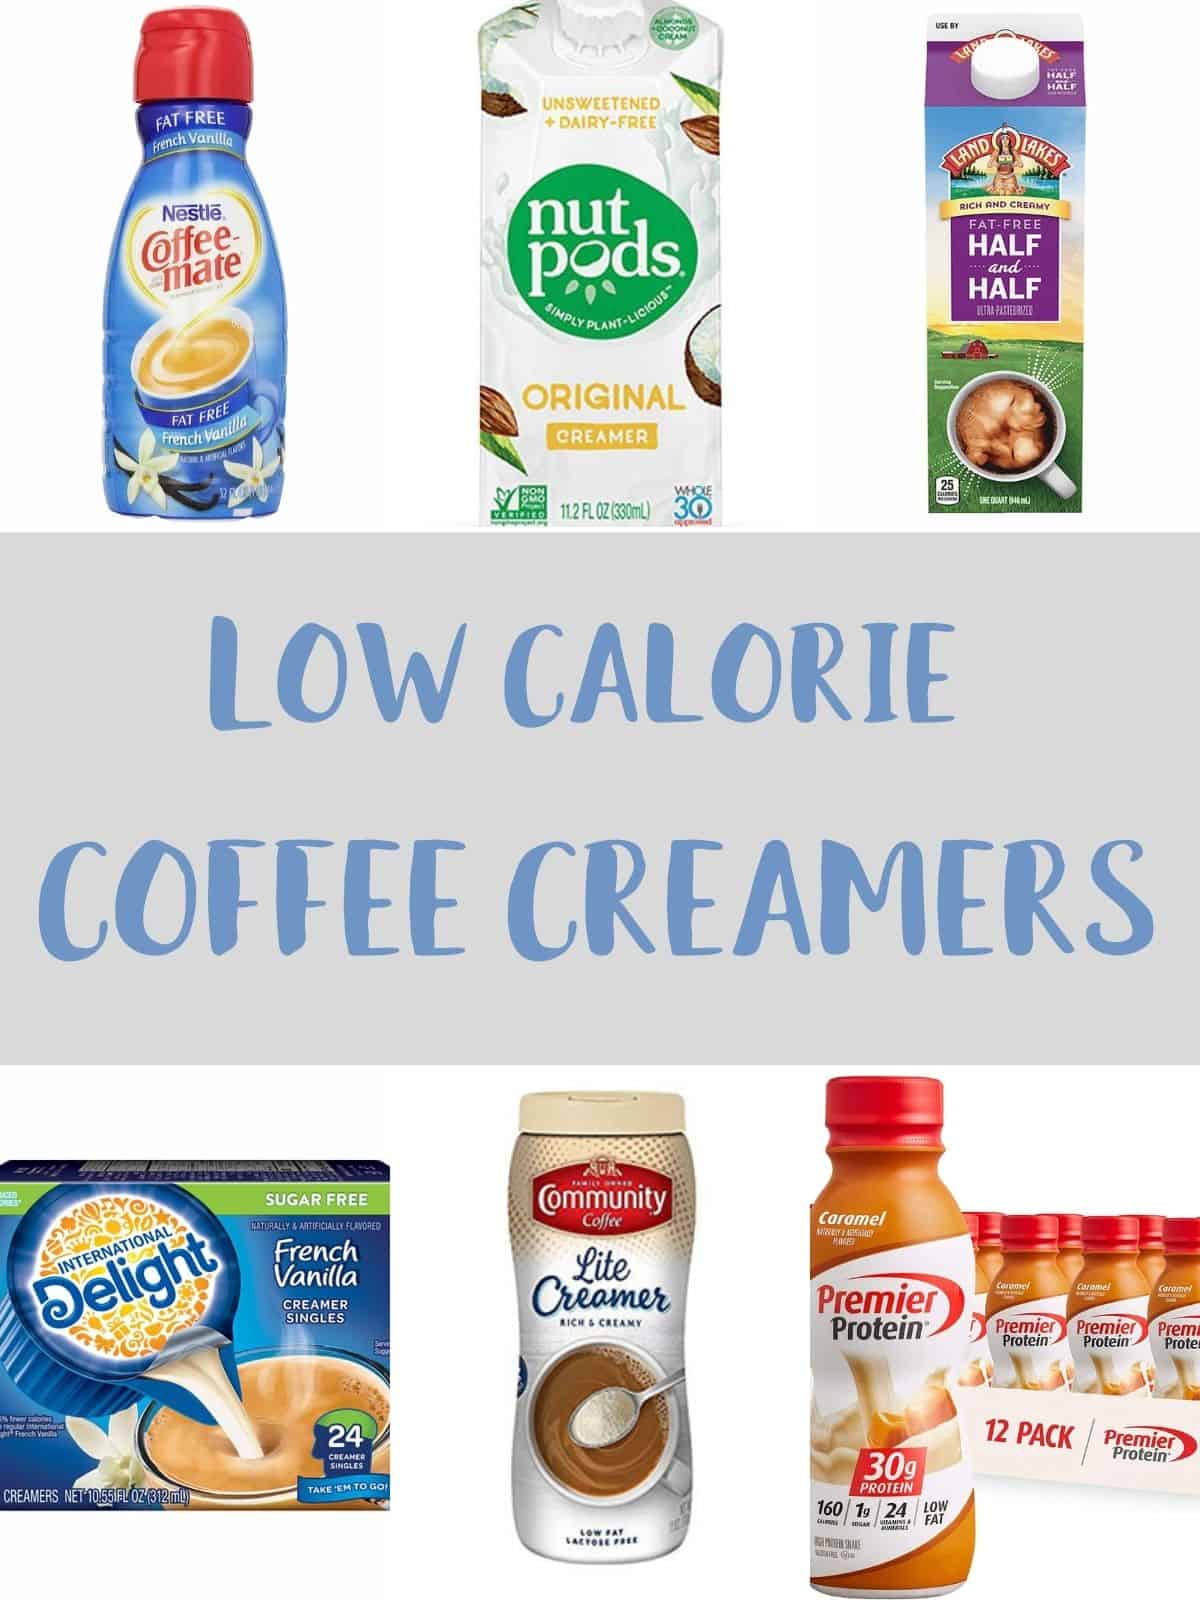 A selection of 6 coffee creamers with text overlay stating Low calorie coffee creamers.